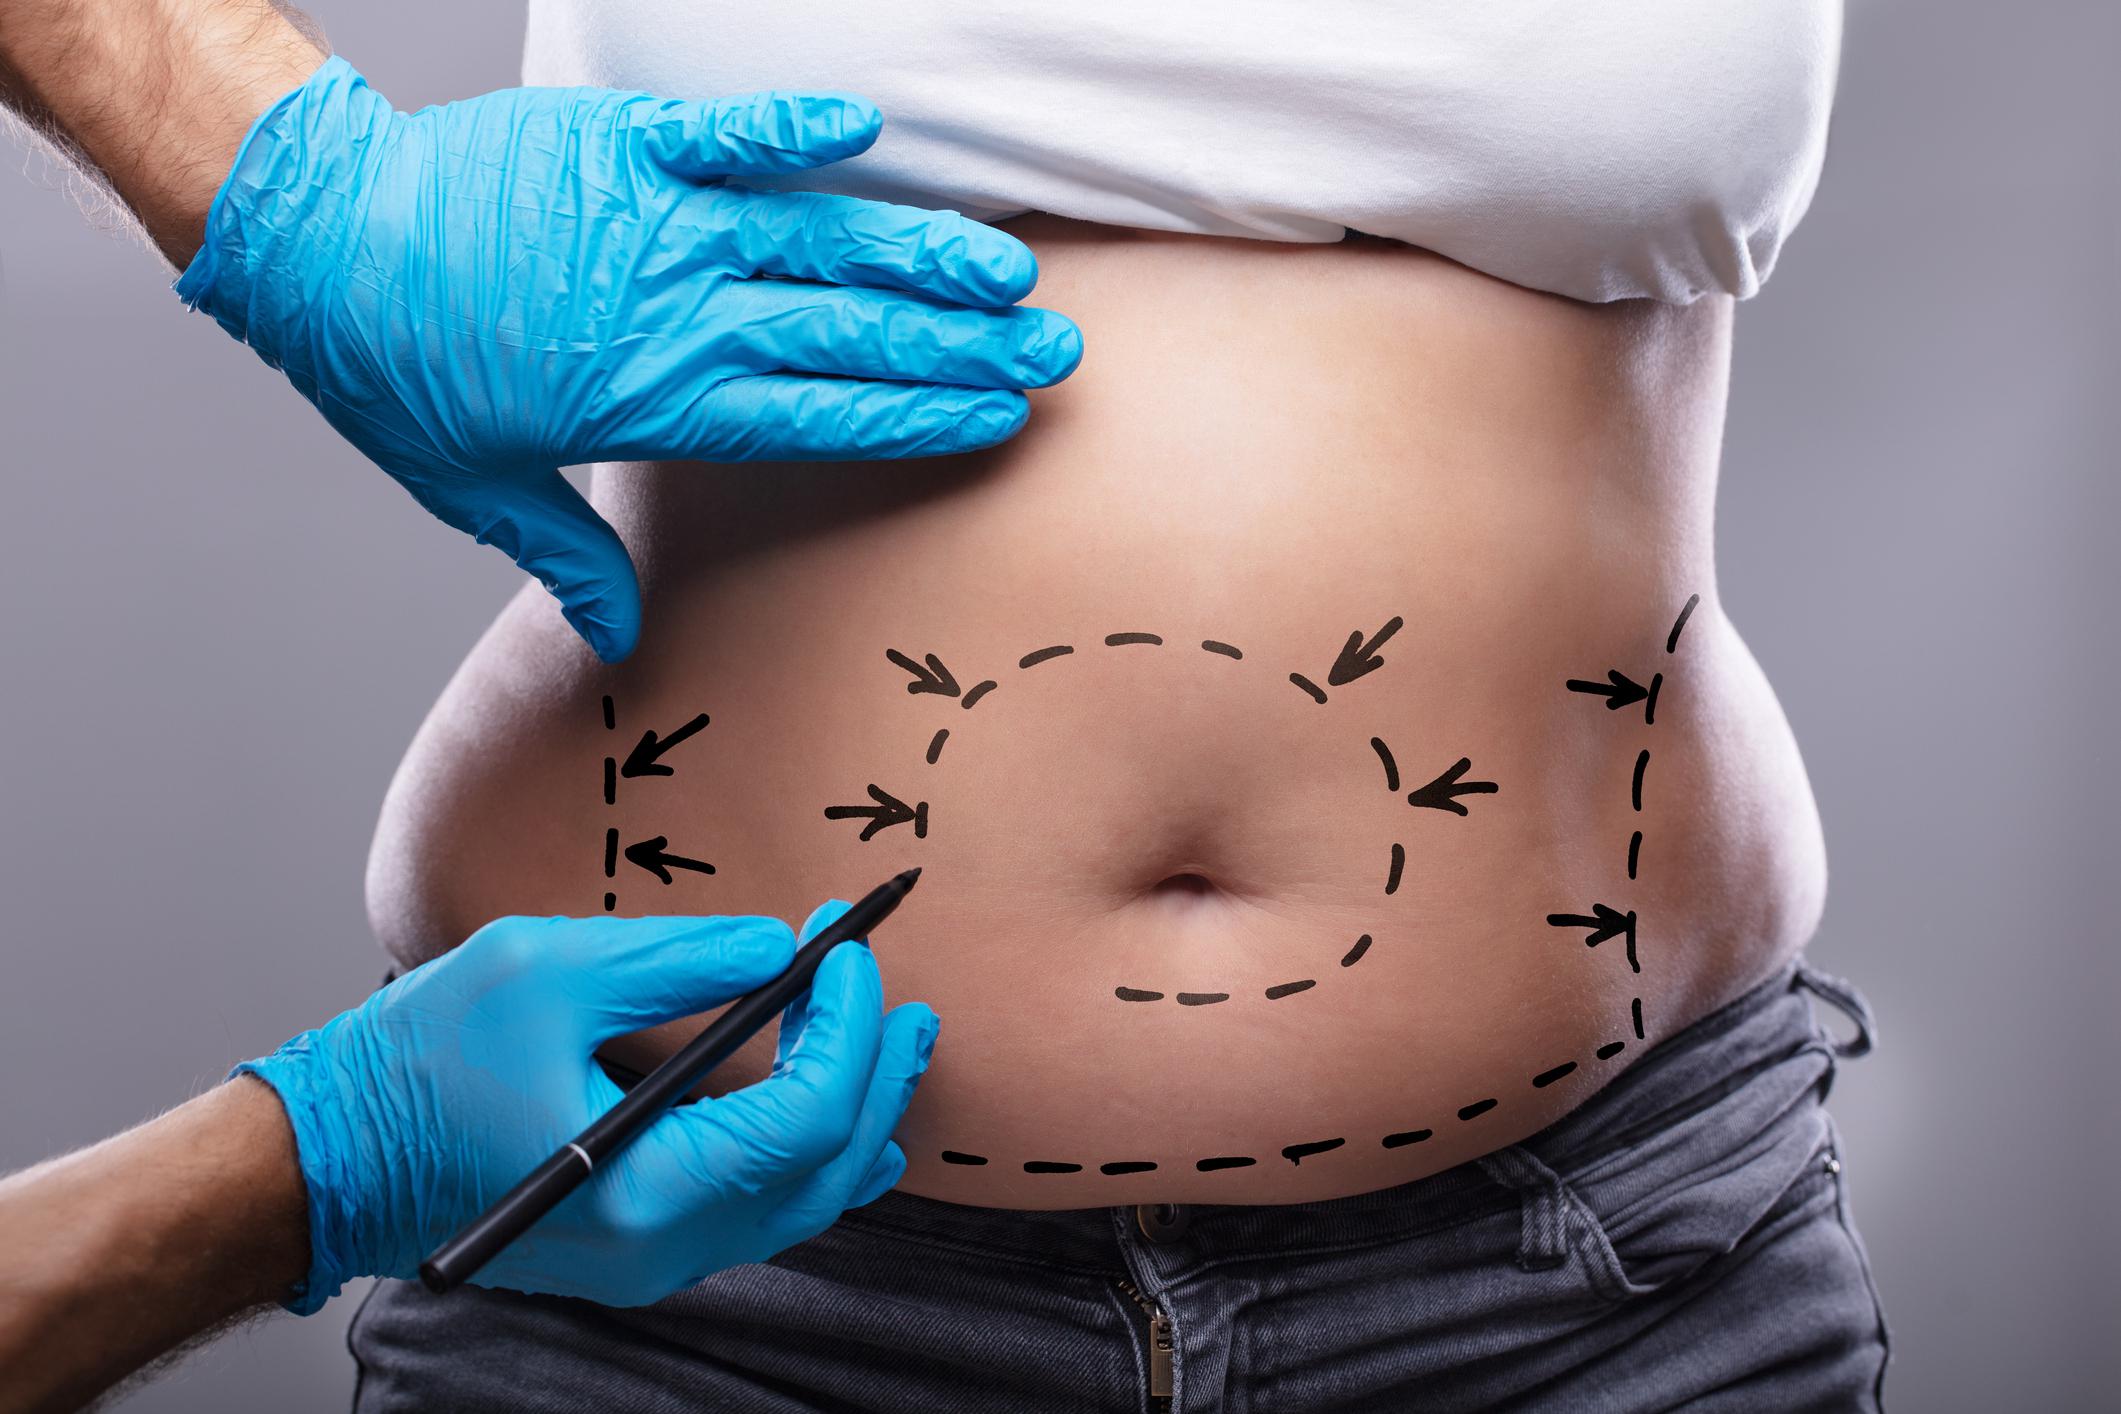 How Pregnancy Affects a Tummy Tuck